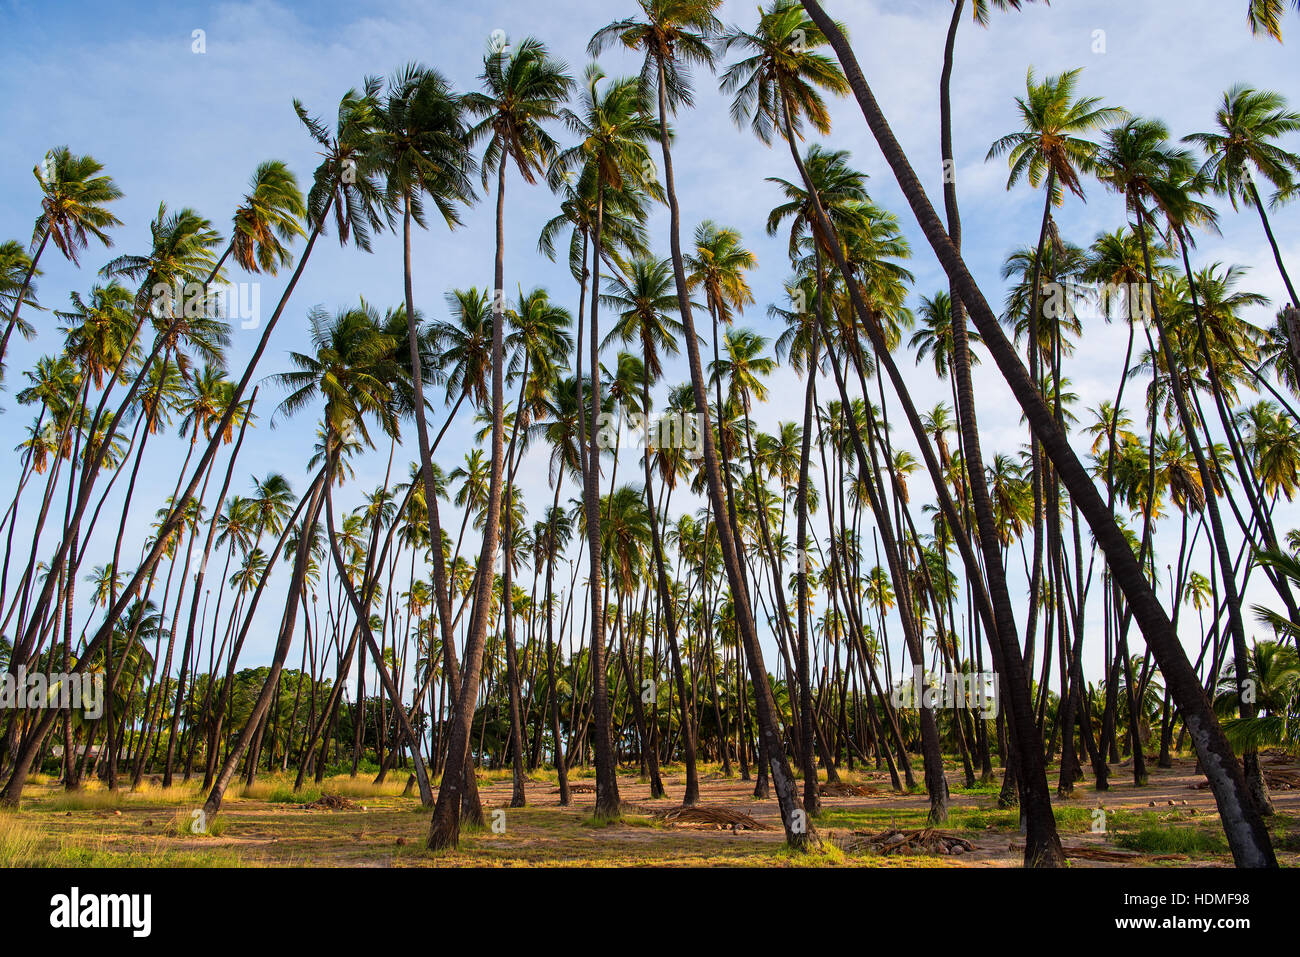 Kapuaiwa Coconut Grove is one of the last royal coconut groves in Hawai'i. King Kamehameha IV had a thousand coconut palm trees planted to honor his w Stock Photo